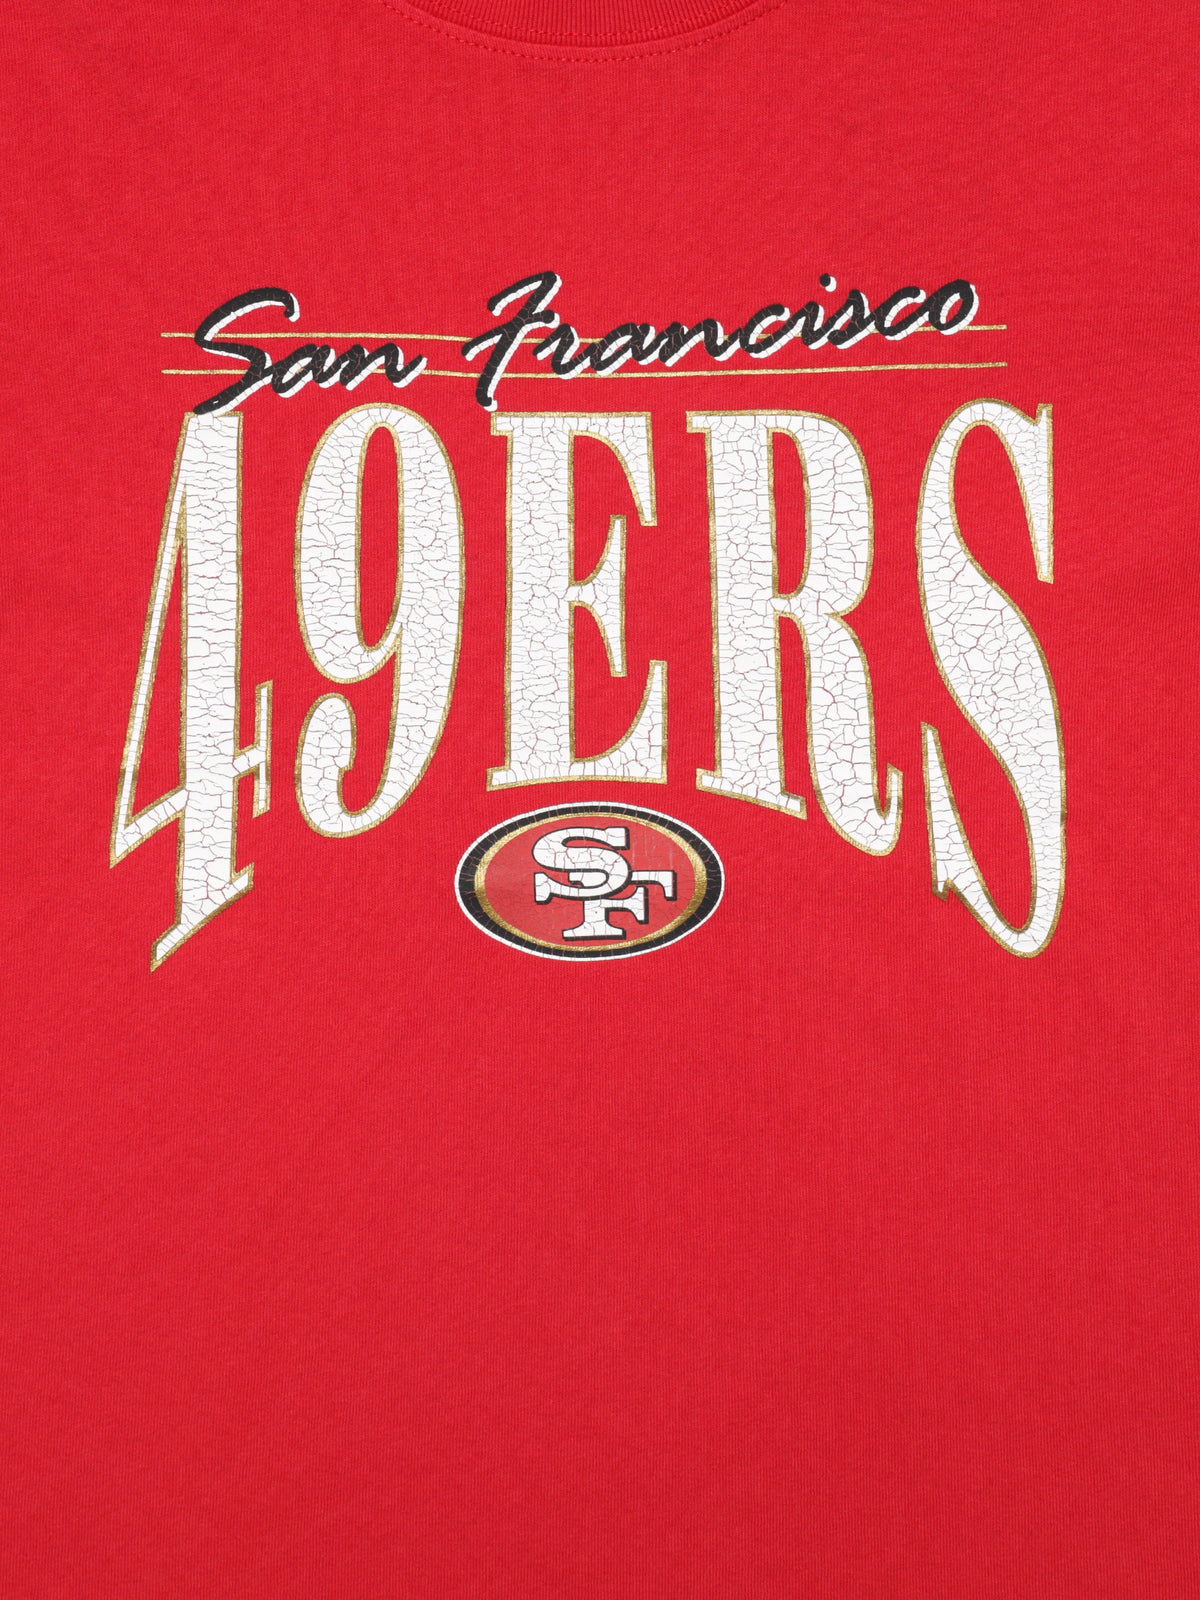 Vintage Arch Boxy 49ers T-Shirt in Faded Crimson